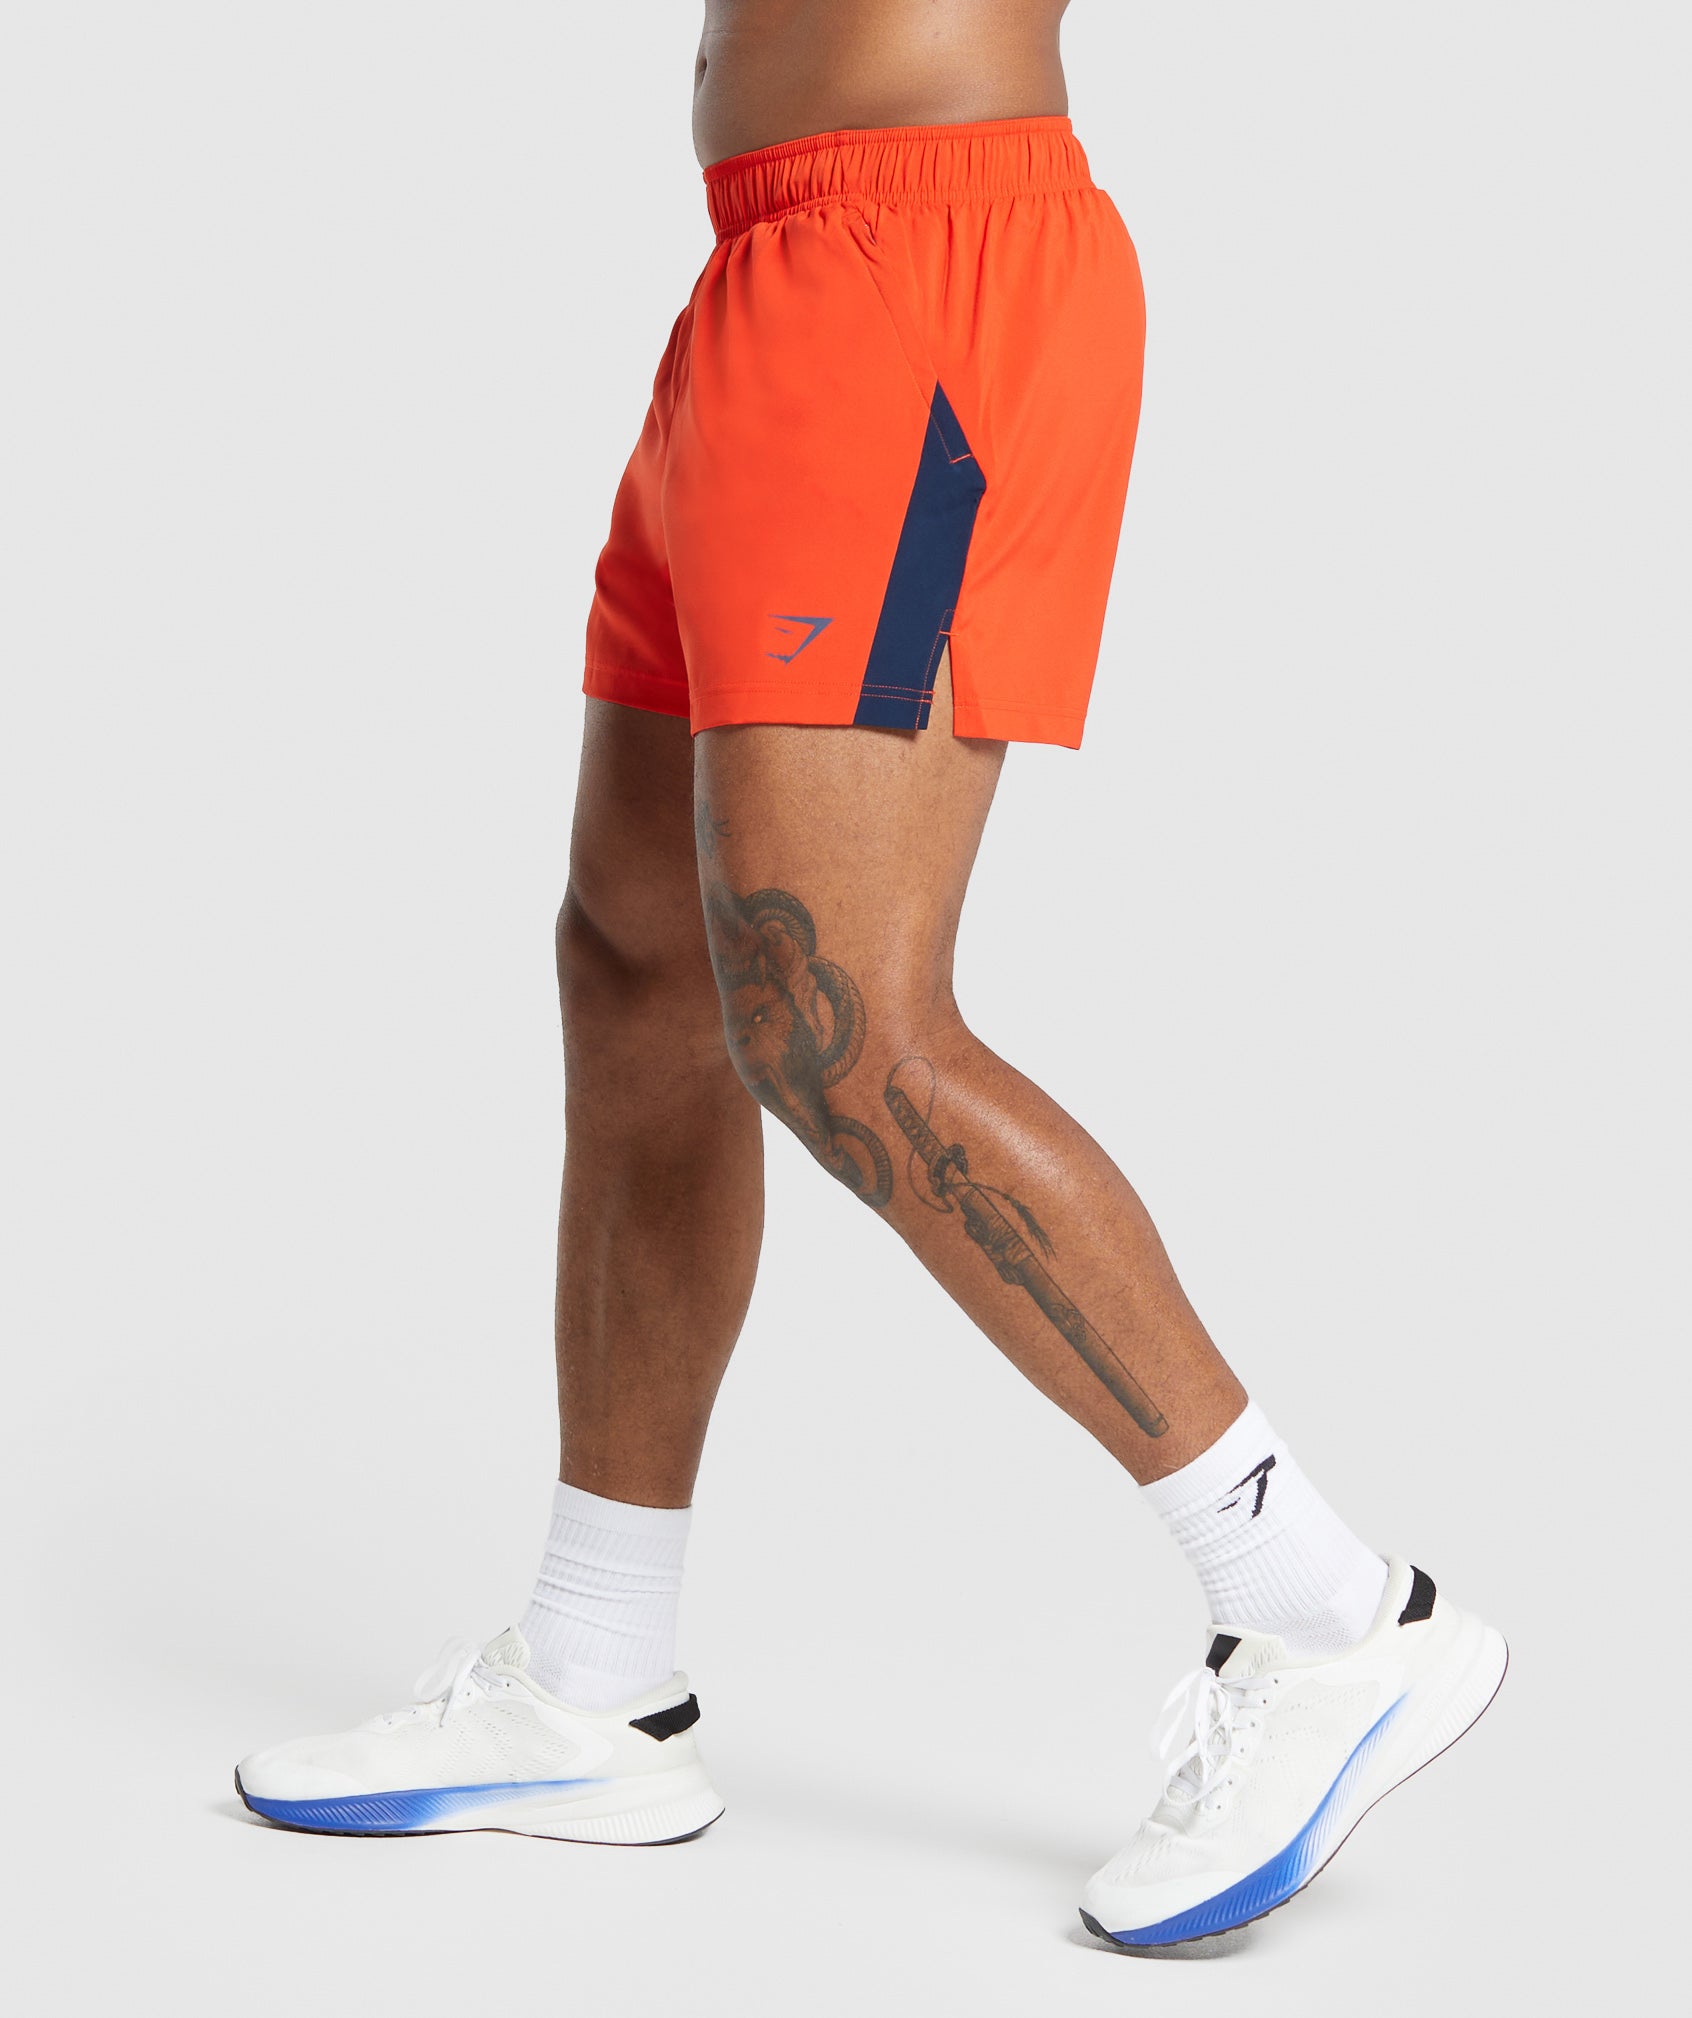 Sport 5" Shorts in Electric Orange/Navy - view 3